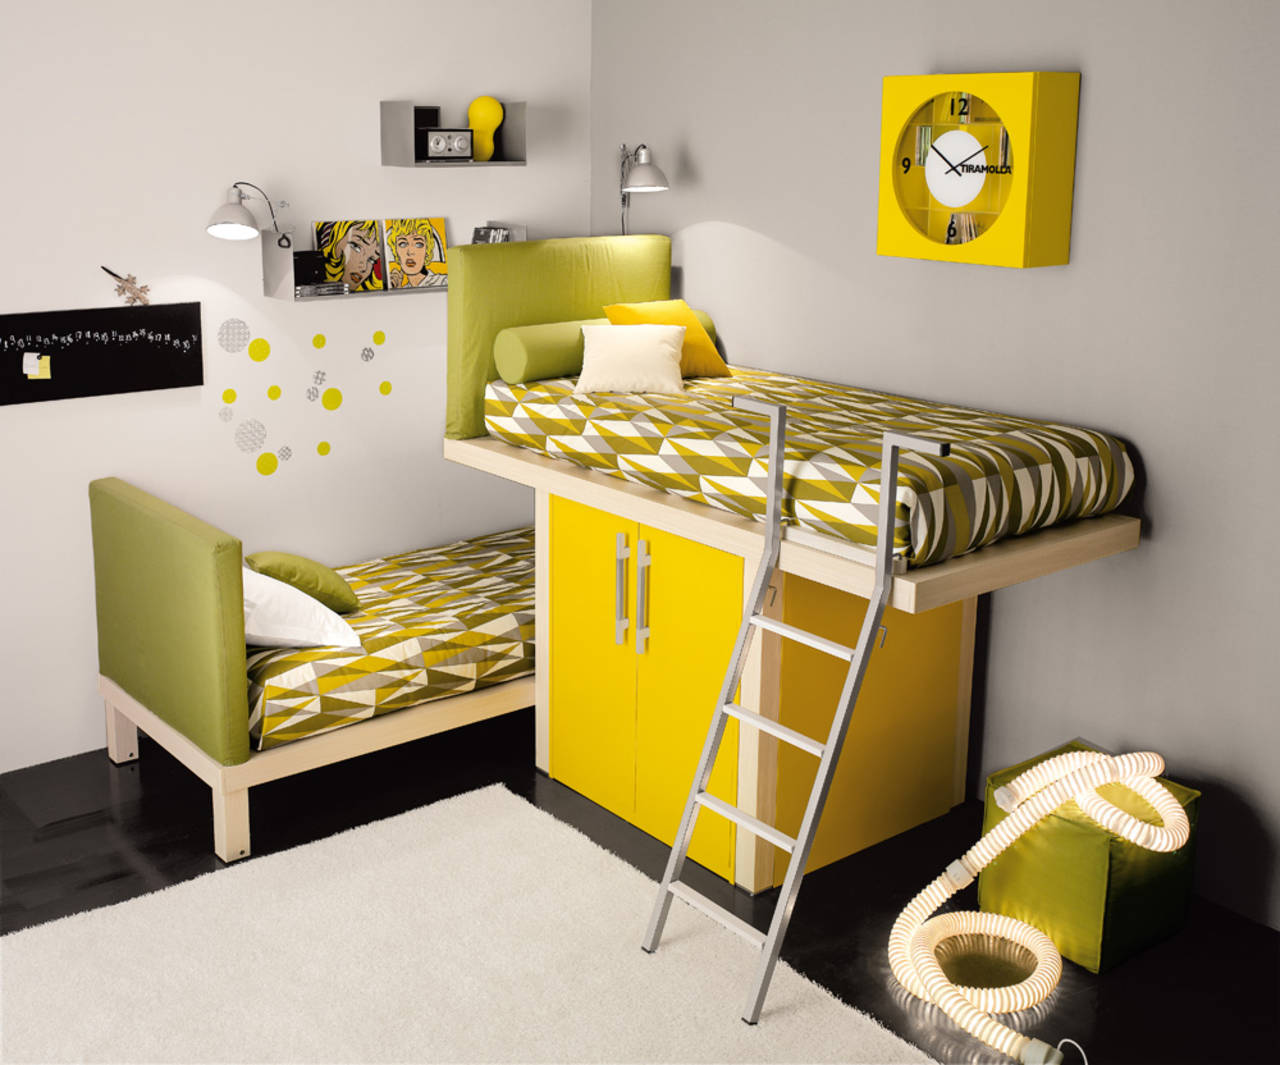 Multifunctional Modular Furniture for Bedrooms - Home Reviews